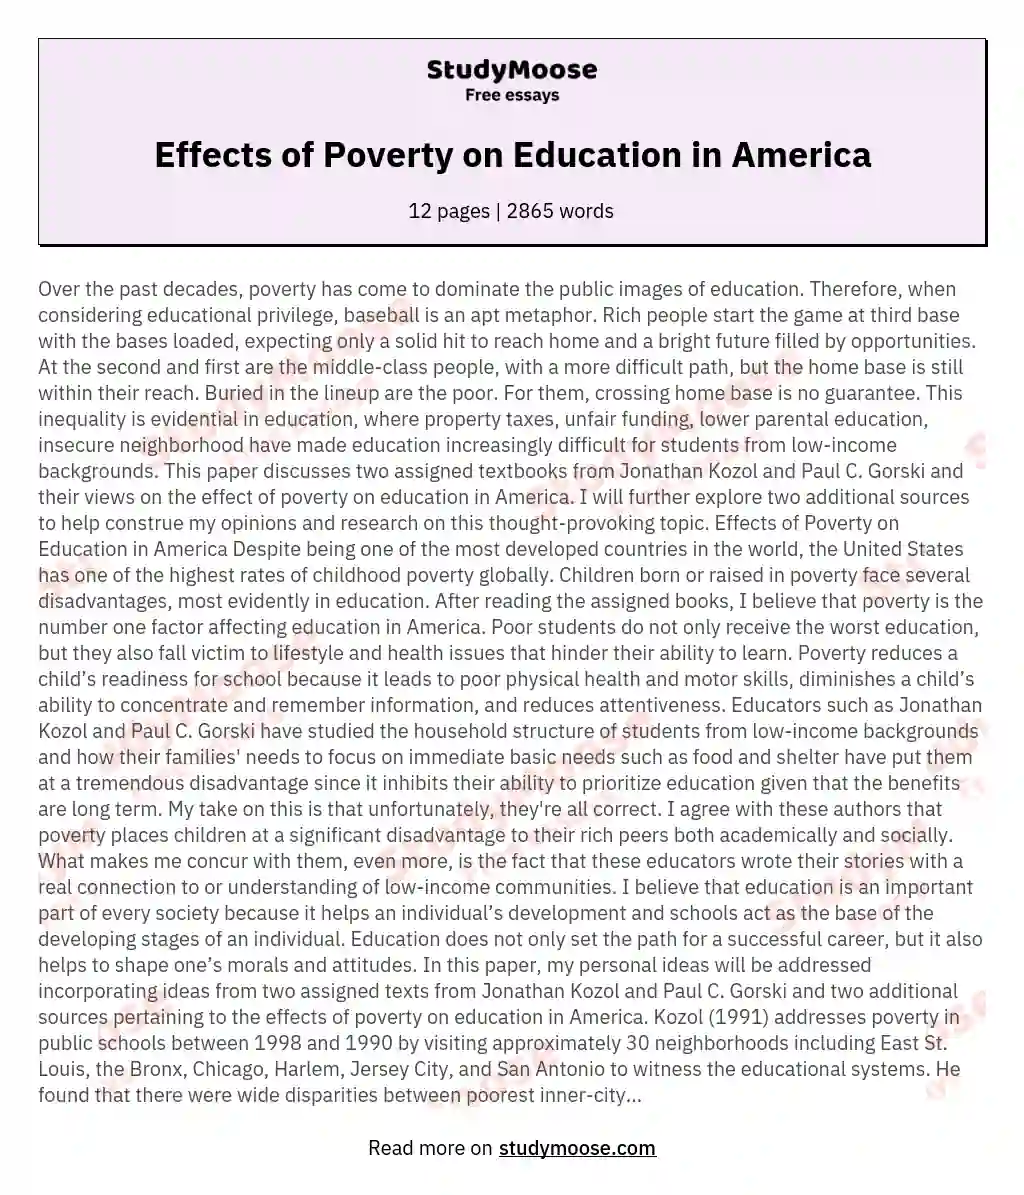 Effects of Poverty on Education in America essay